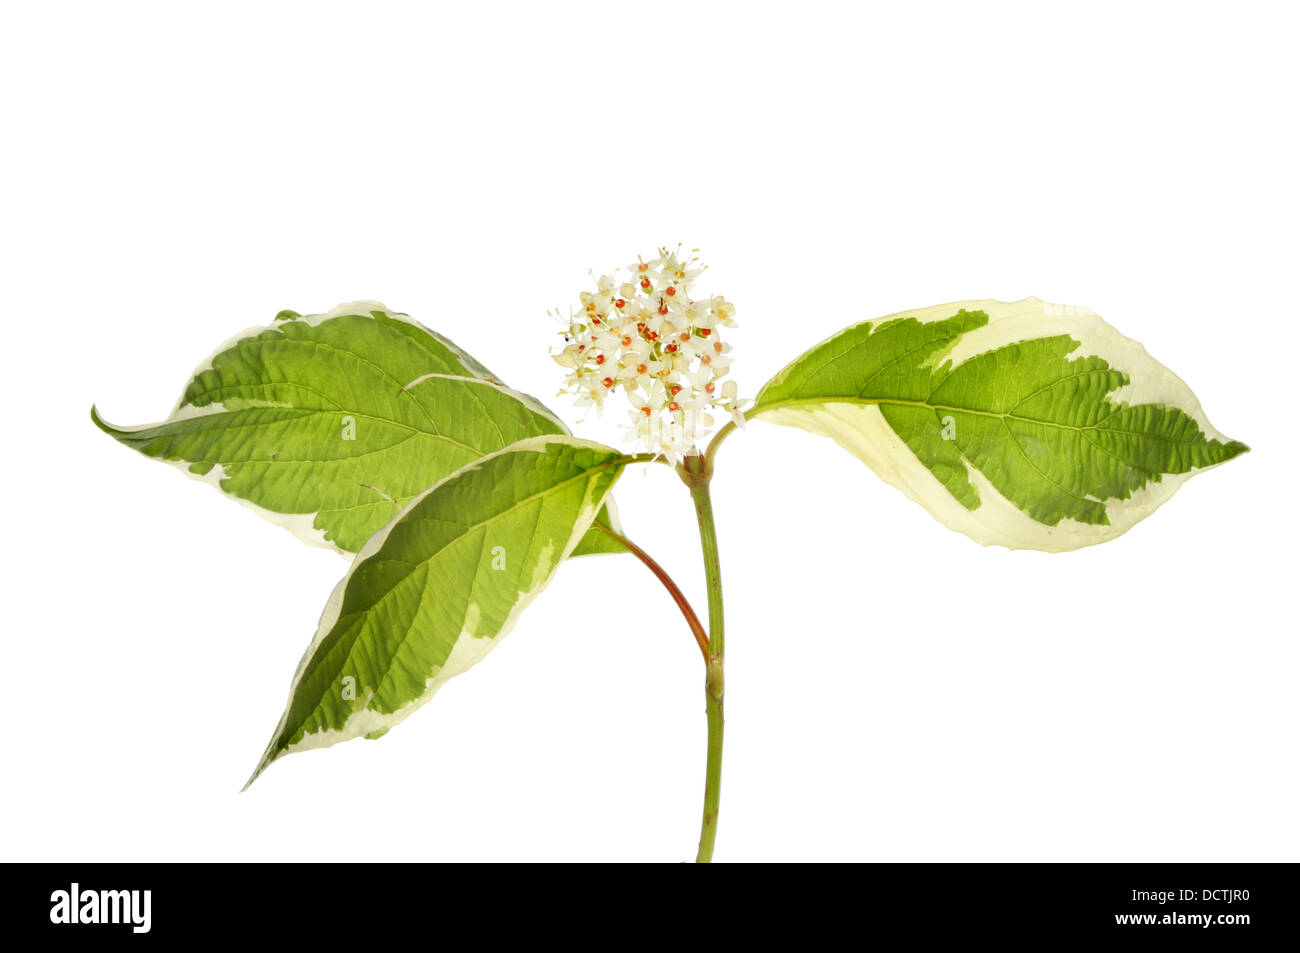 Dogwood,cornus, flowers and variegated leaves isolated against white Stock Photo